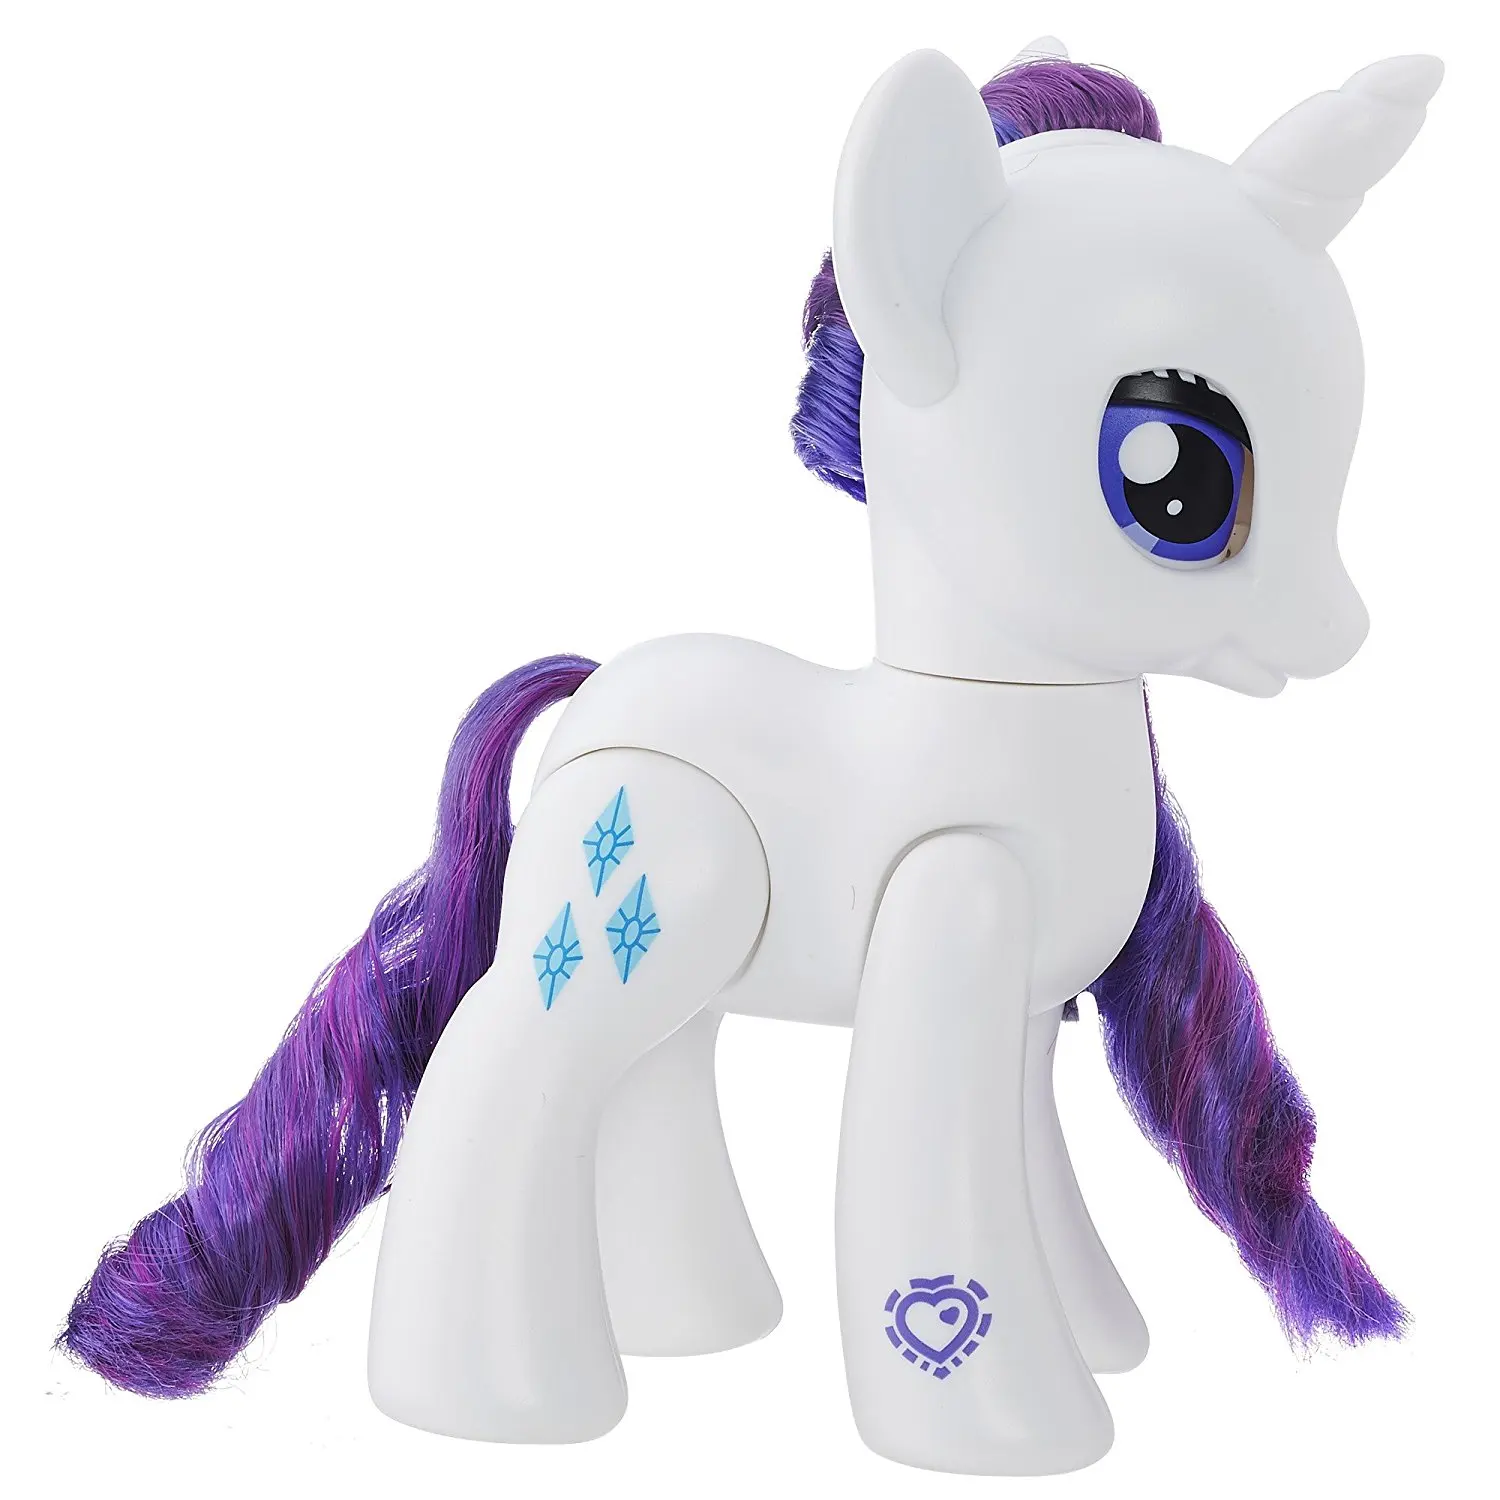 Cheap My Little Pony 2 Inch Figures, find My Little Pony 2 Inch Figures